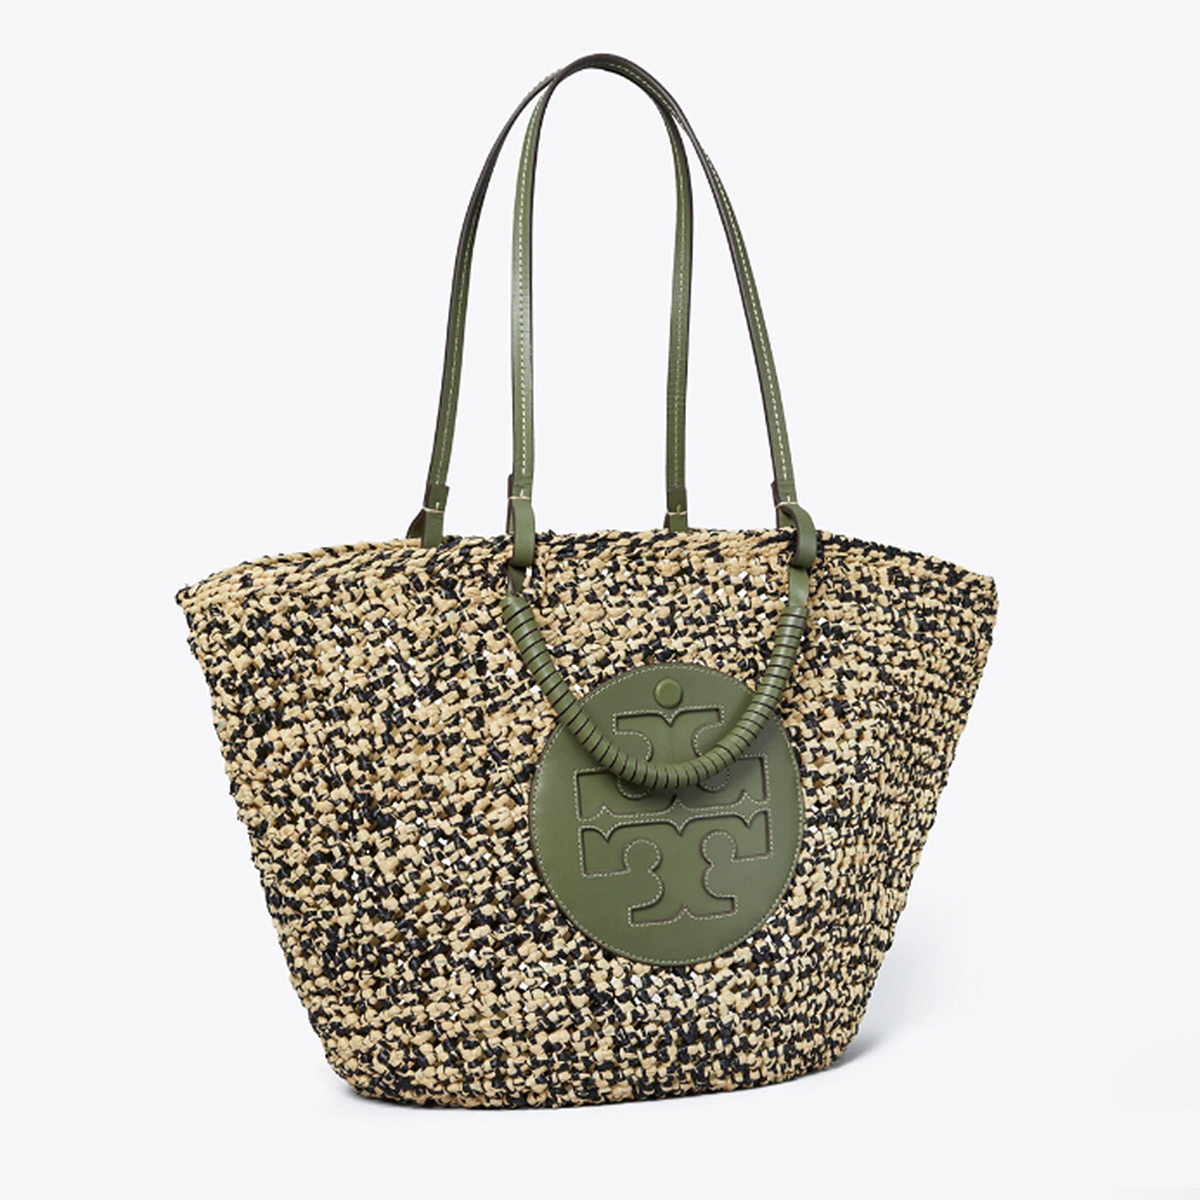 Tory Burch Natural Snake & Raffia Leather Tote, Best Price and Reviews